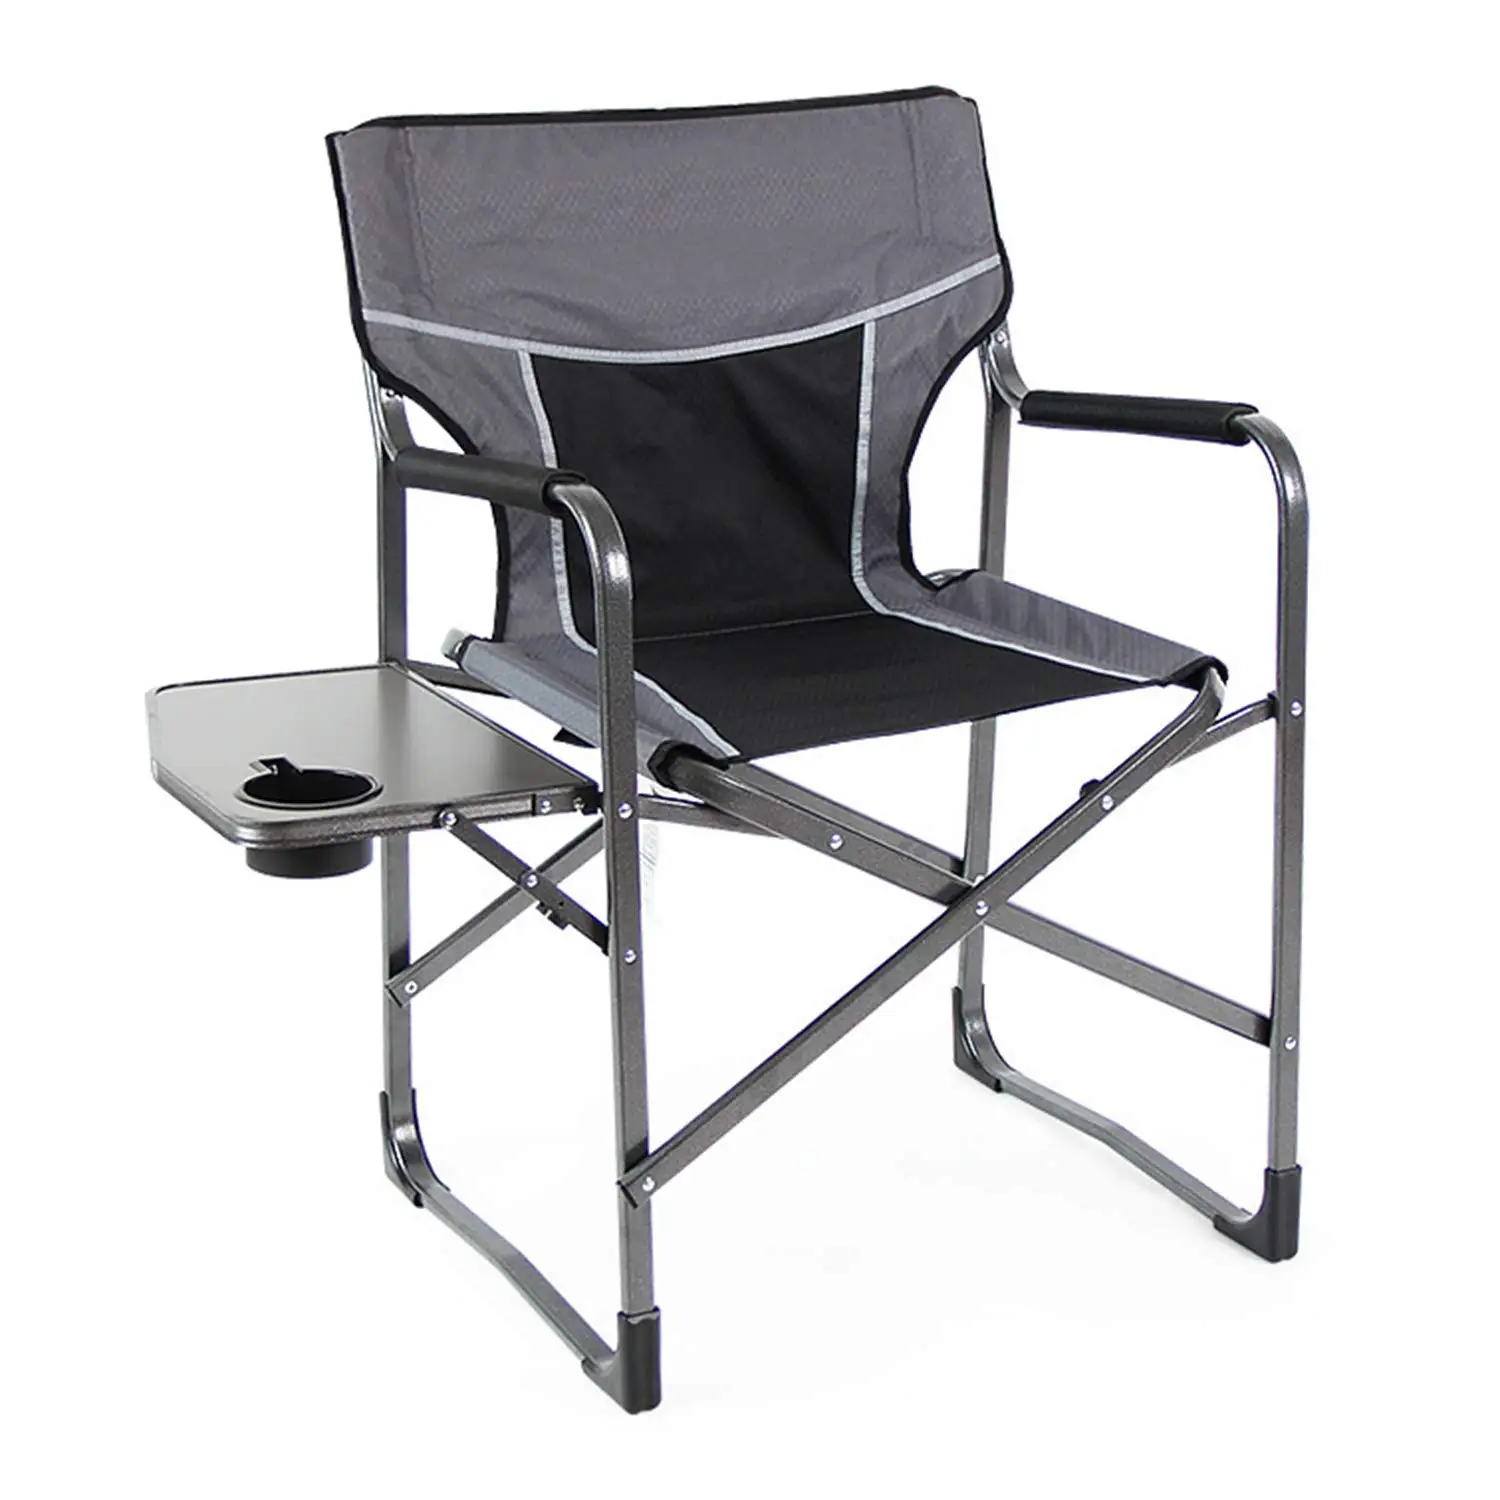 Outdoor Folding Chair Multifunctional Aluminum Chair Fishing Beach Camping Lounge Chair Buy Folding Beach Chair Folding Camping Chair Folding Fishing Chair Product On Alibaba Com